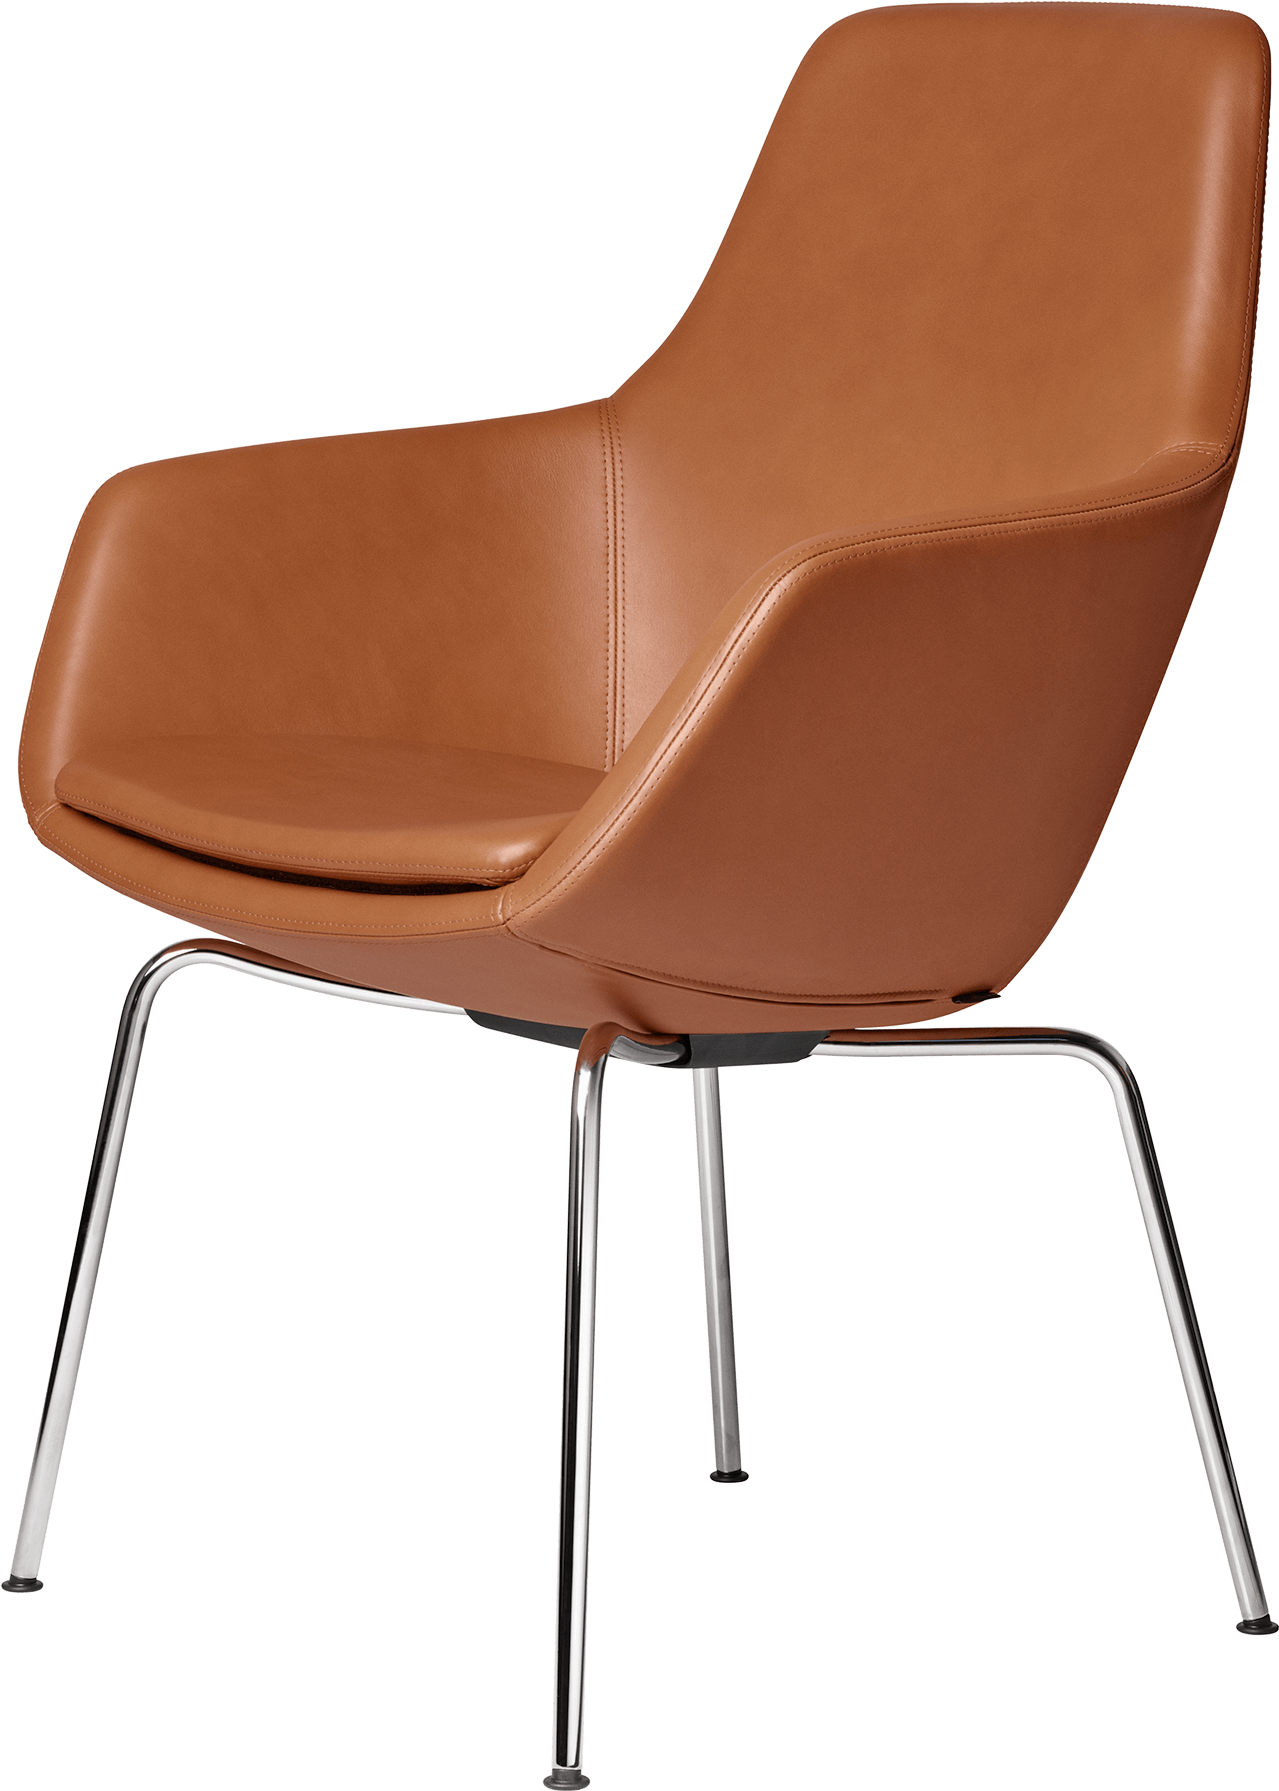 A Brown Chair With Metal Legs